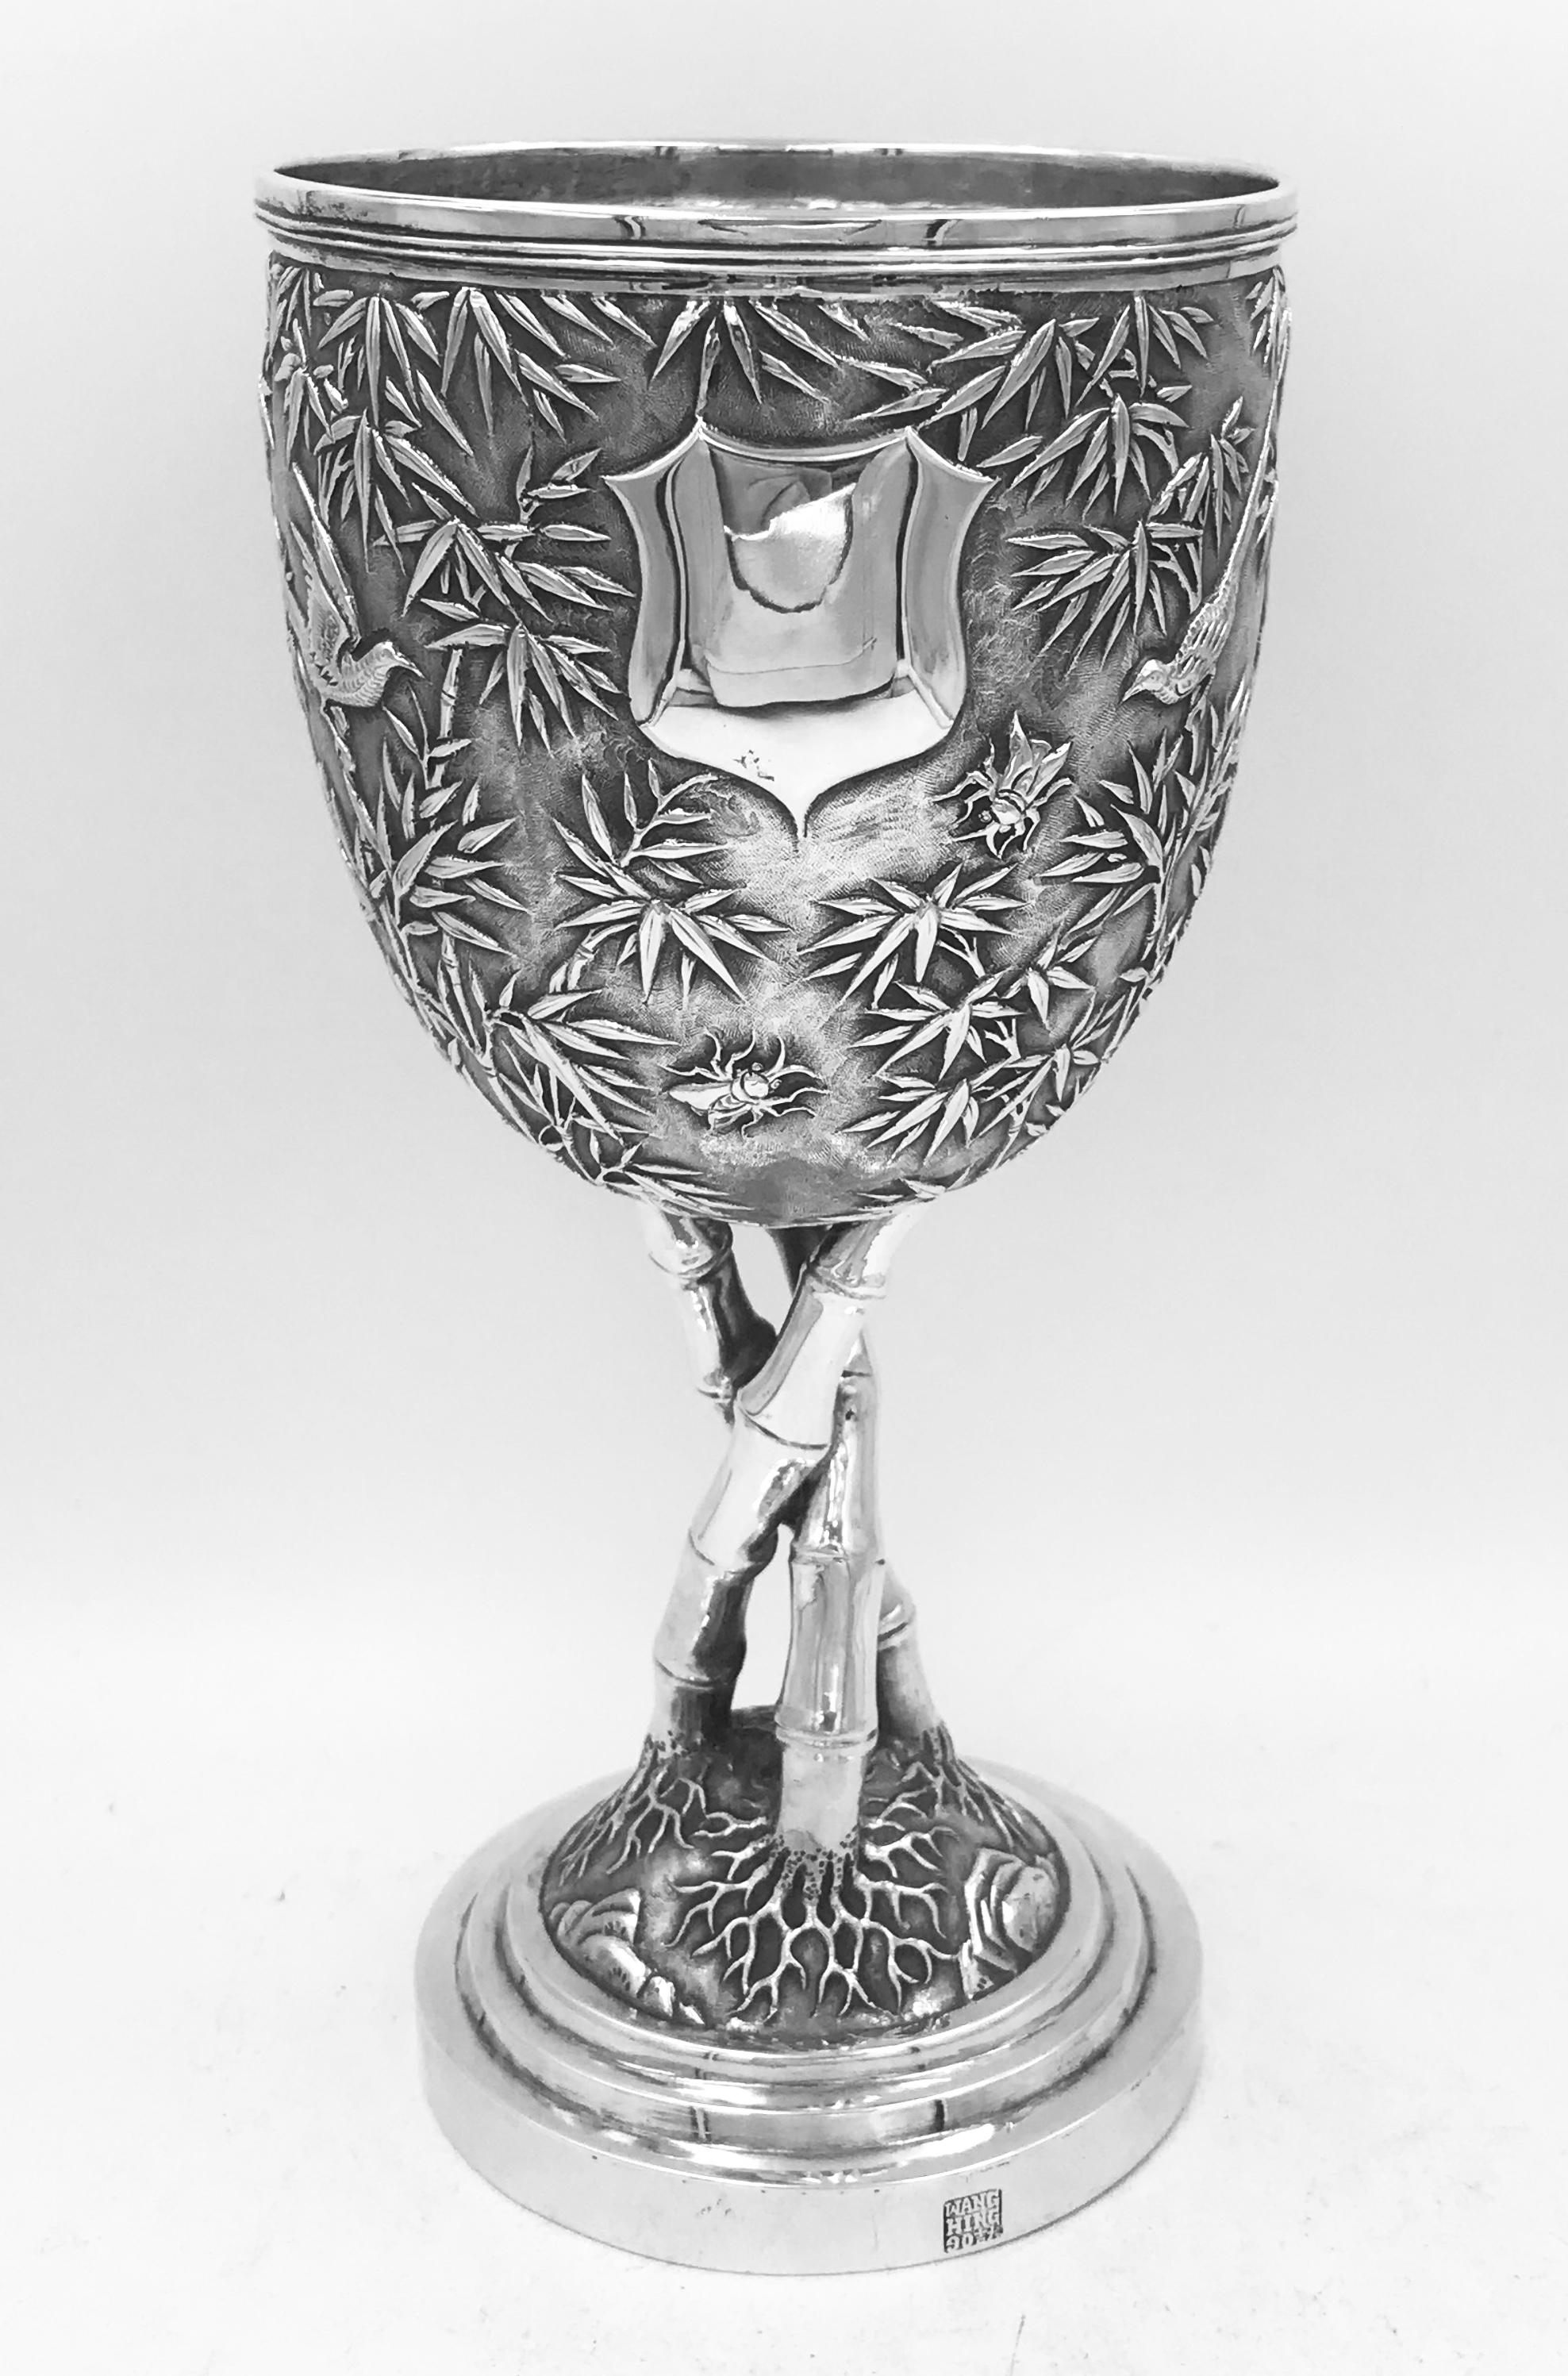 A Chinese export silver goblet circa 1890, decorated with birds, bugs and bamboo on a matte background. The stem is formed of 3 shoots of bamboo and there is a vacant shield-shape cartouche. Marked with the retailer's mark of Wang Hing '宏兴‘ and the